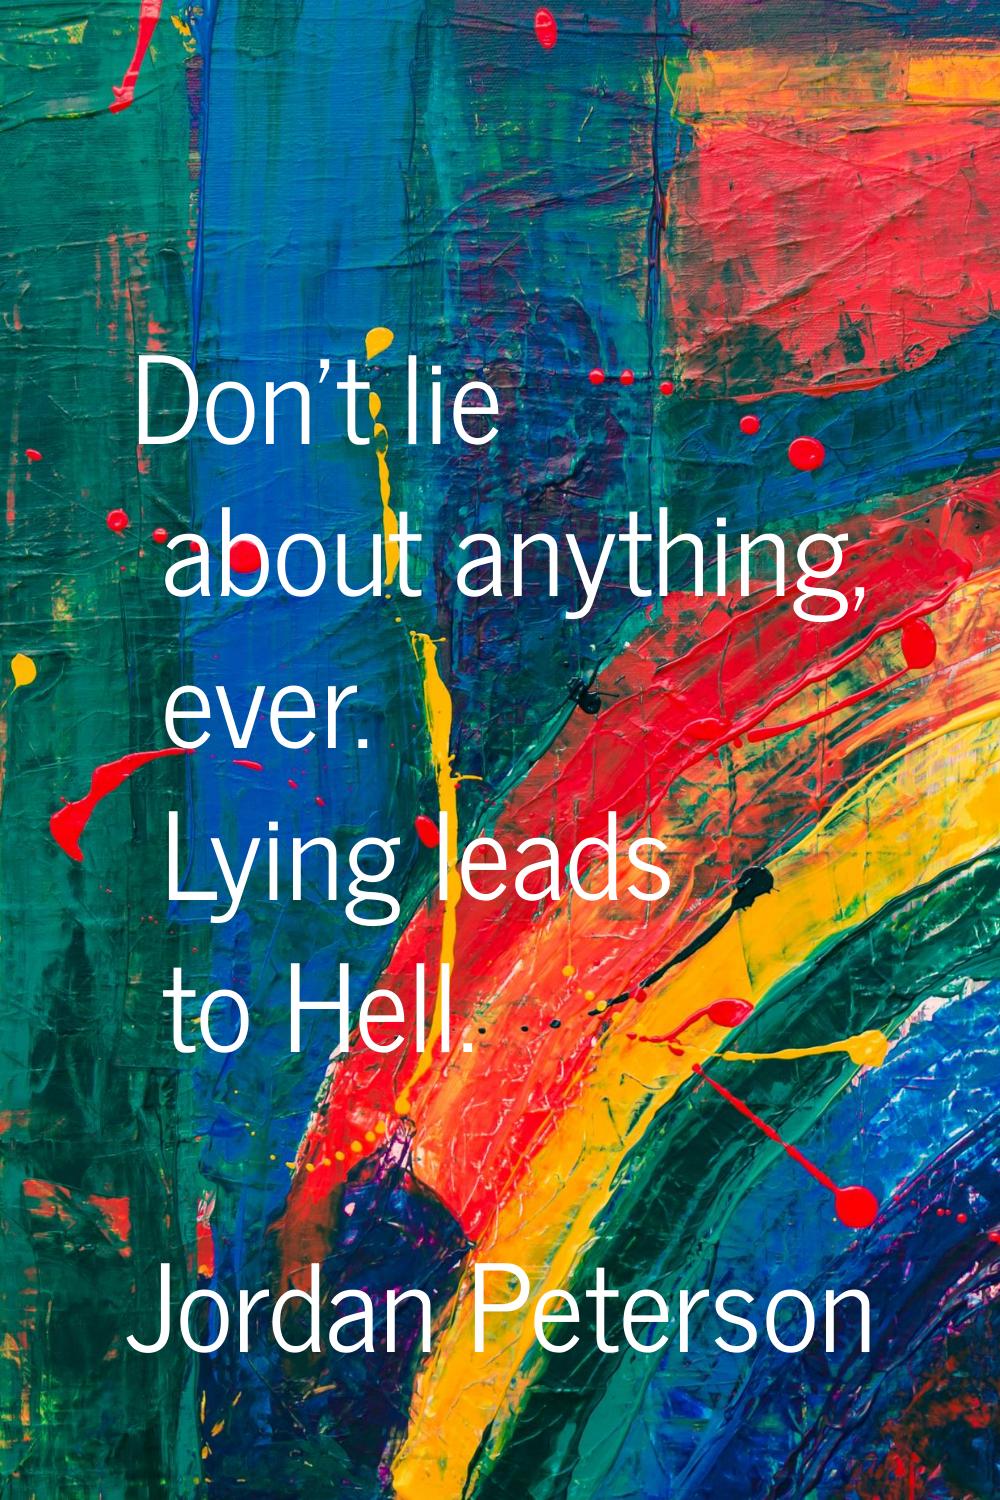 Don't lie about anything, ever. Lying leads to Hell.